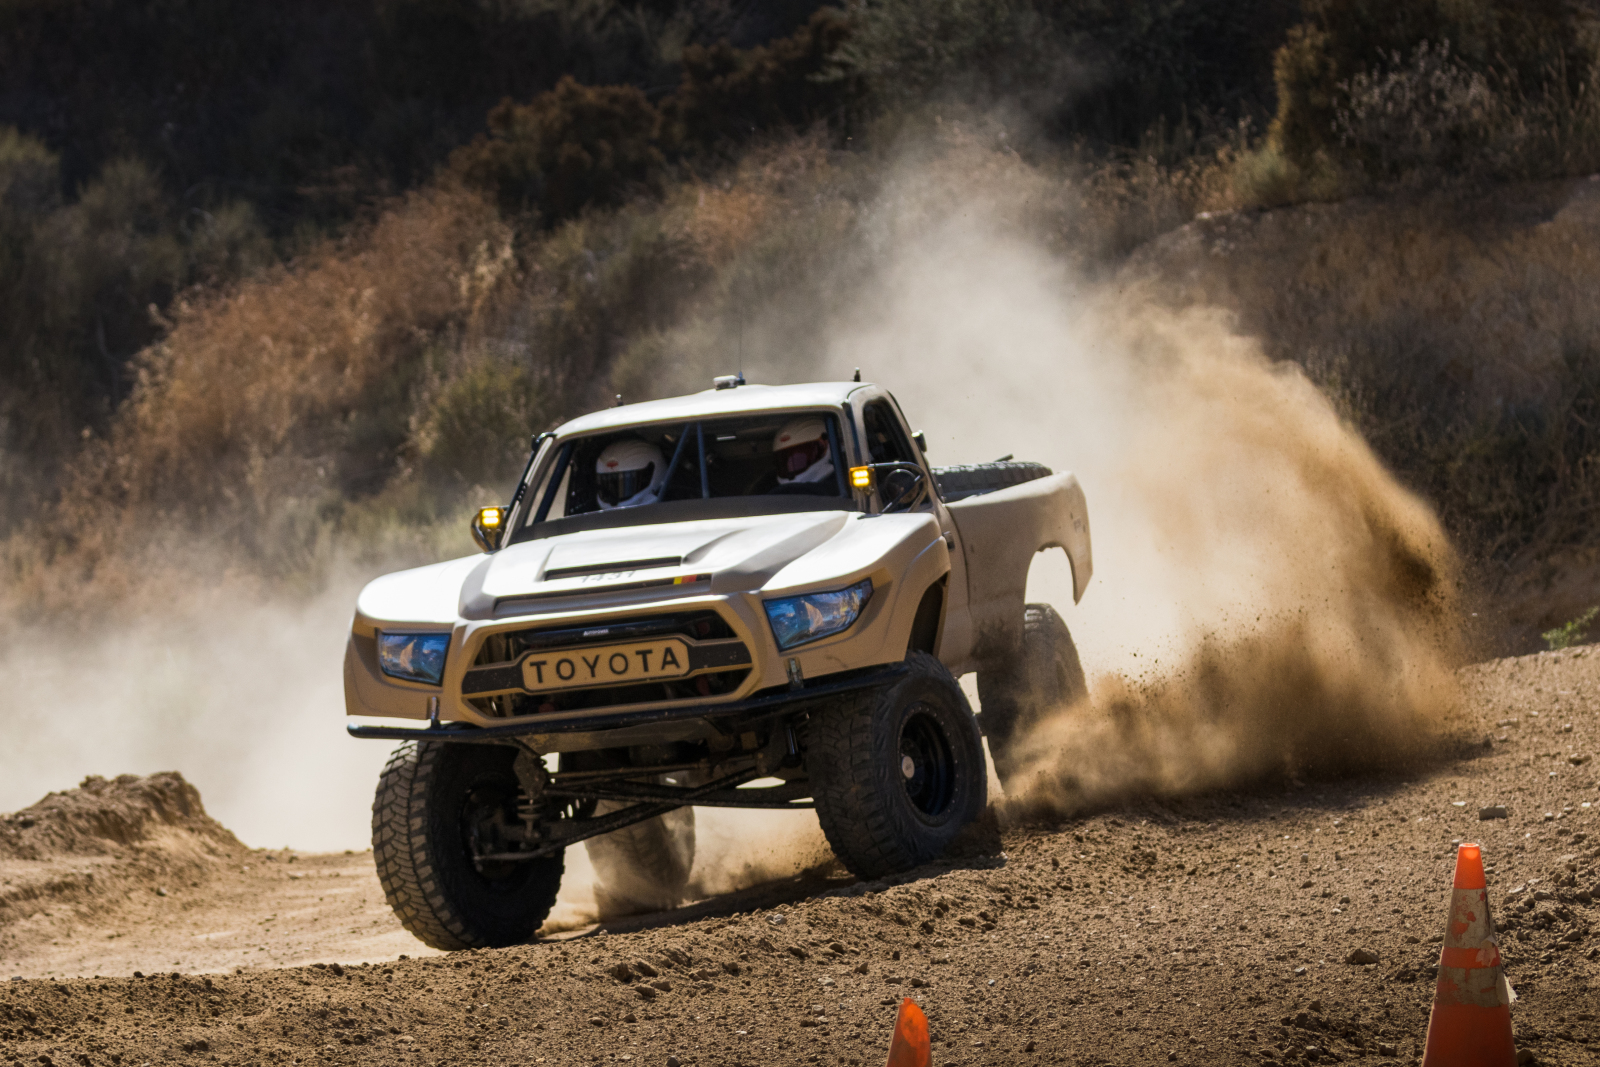 For Sale: Toyota 1400 Race truck - photo2